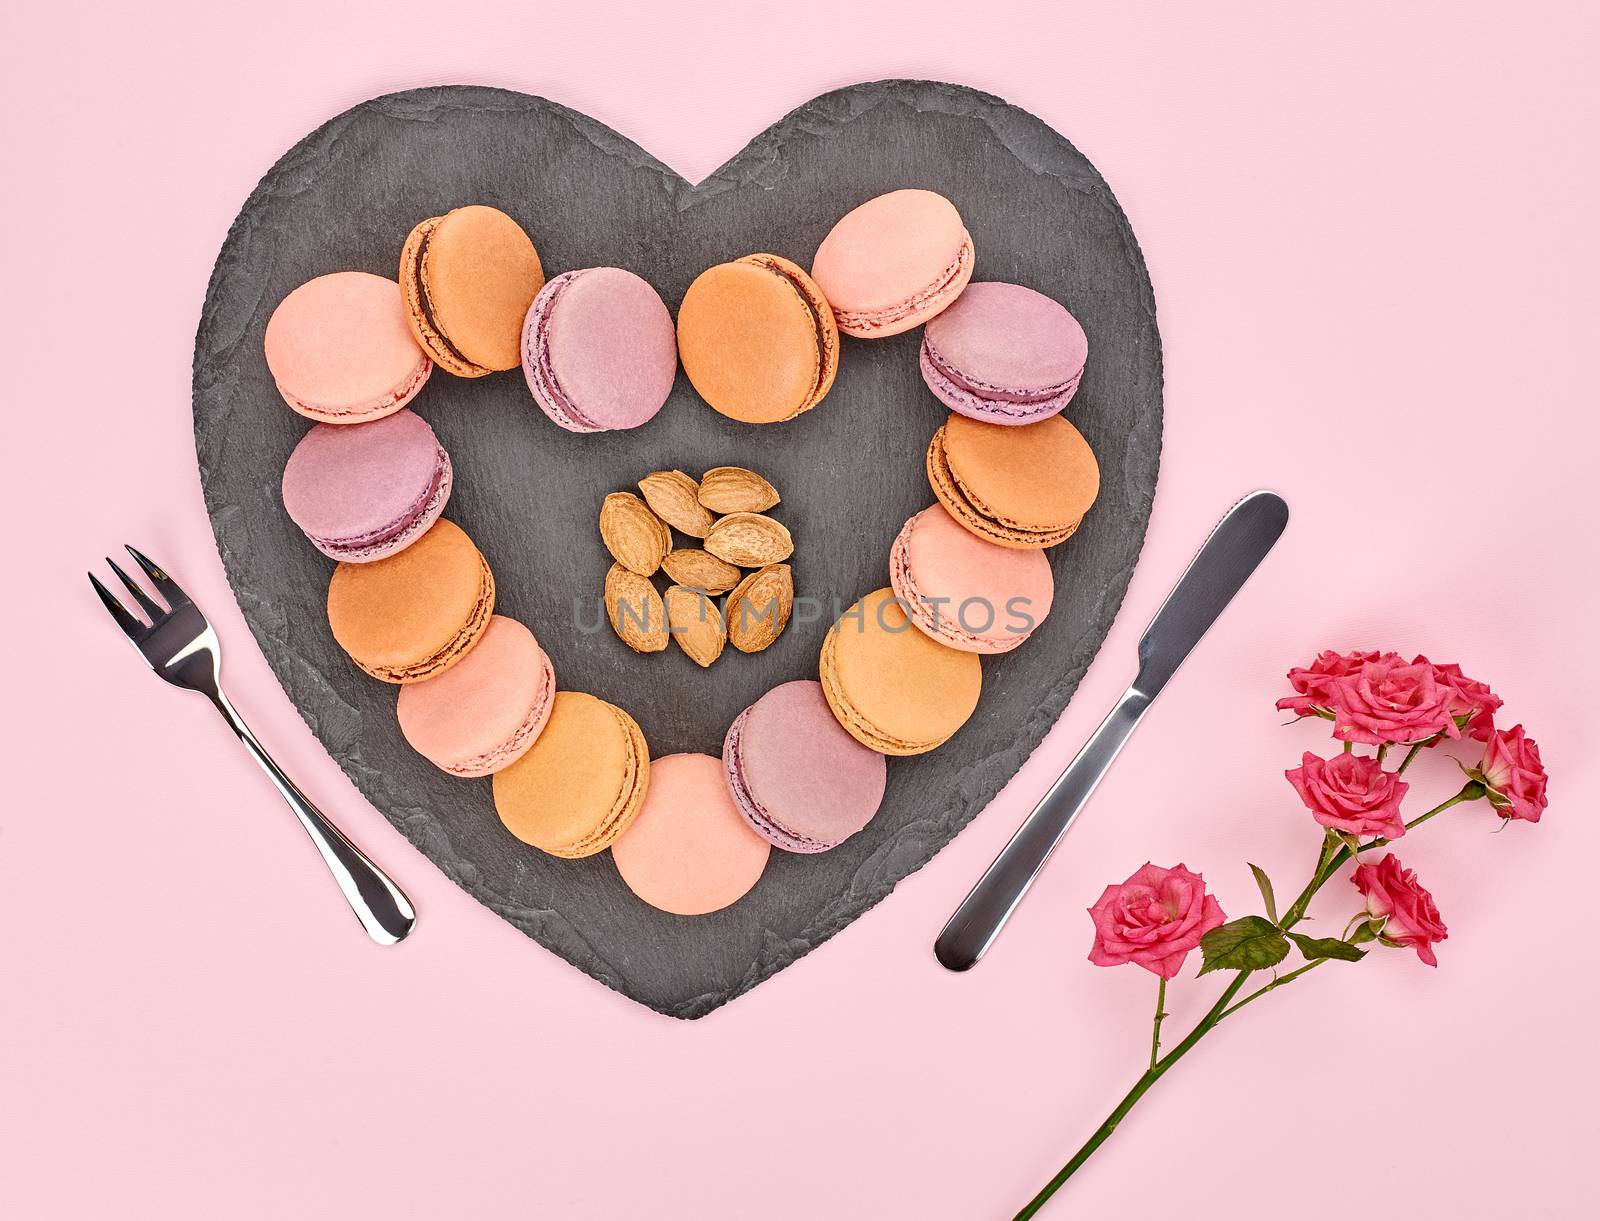 Still life, macarons, heart shape. Table setting by 918